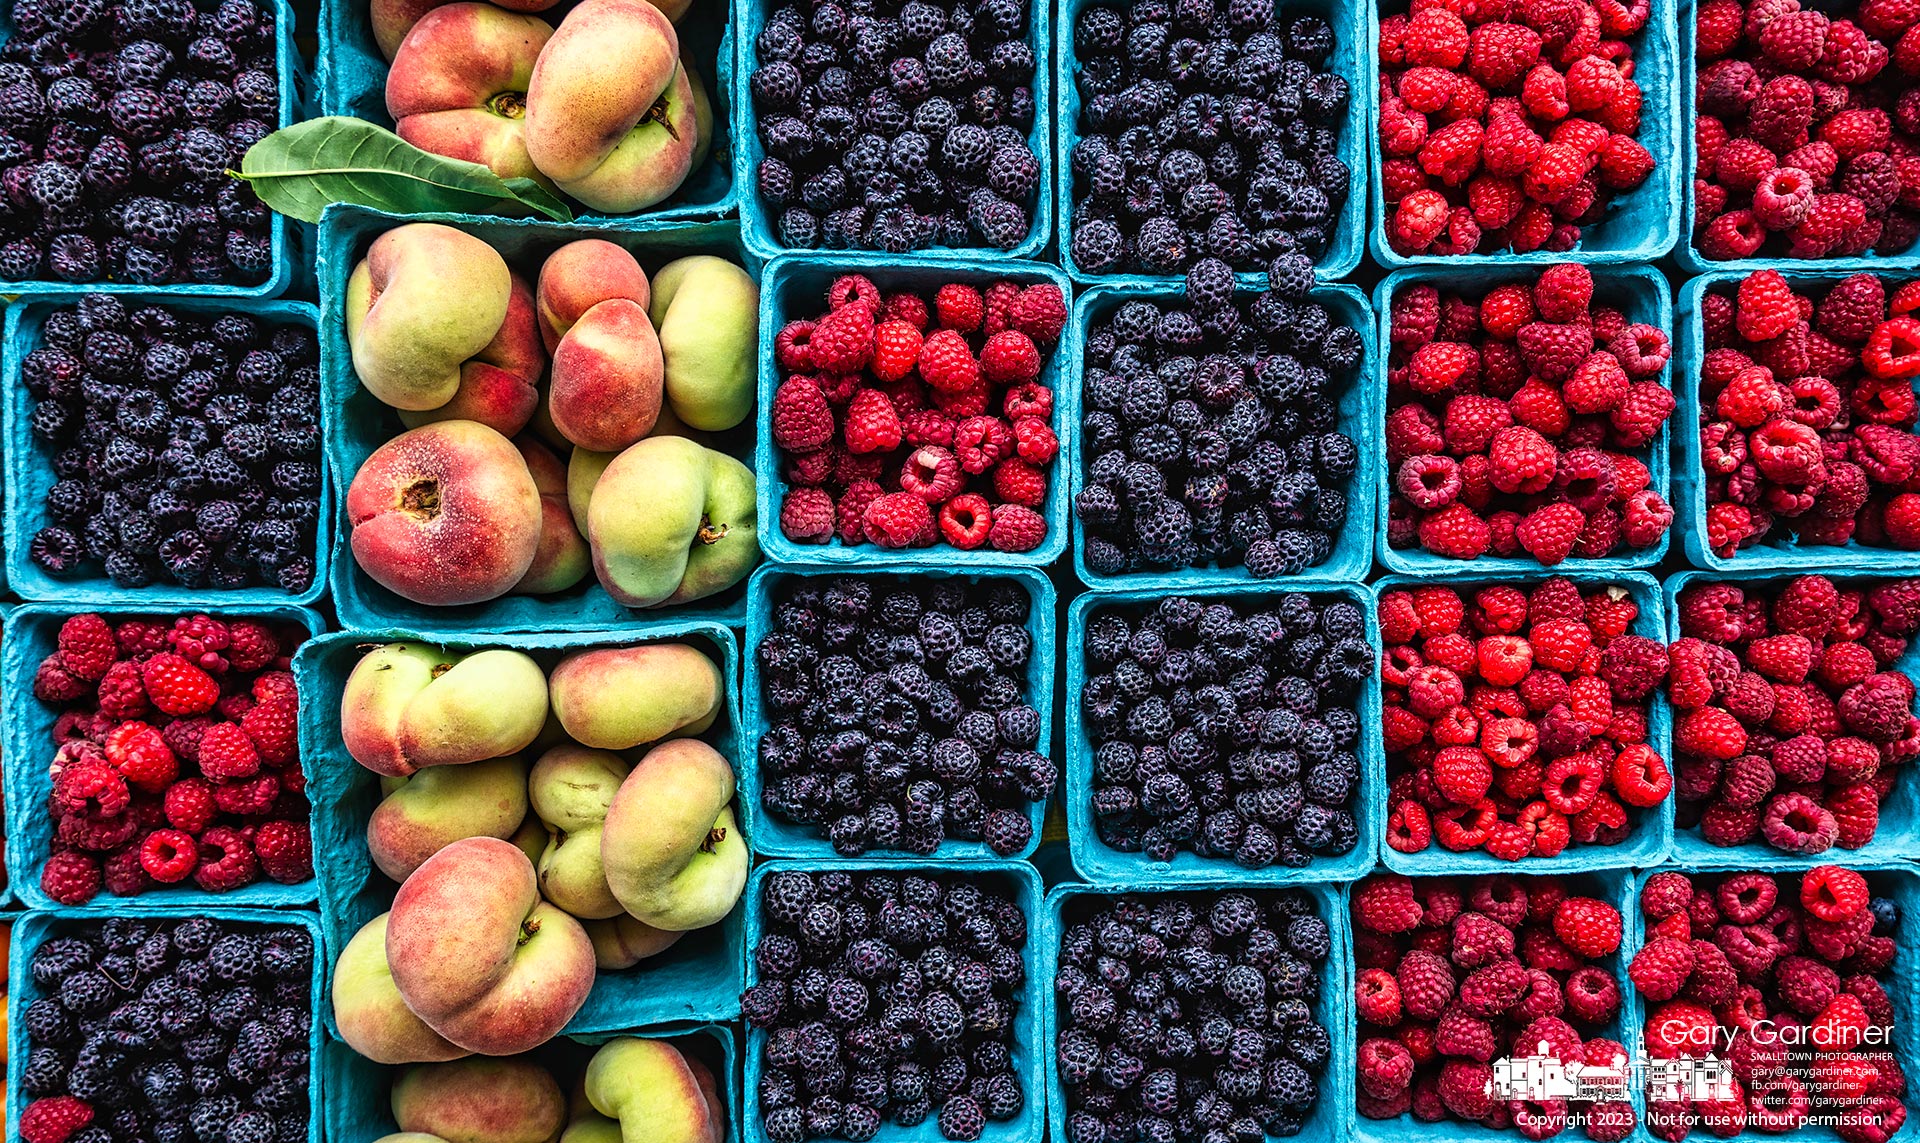 A collection of colorful fruit fills the table of an Amish farmer selling produce at the Saturday Farmers Market in Uptown Westerville. My final Photo for July 15, 2023.